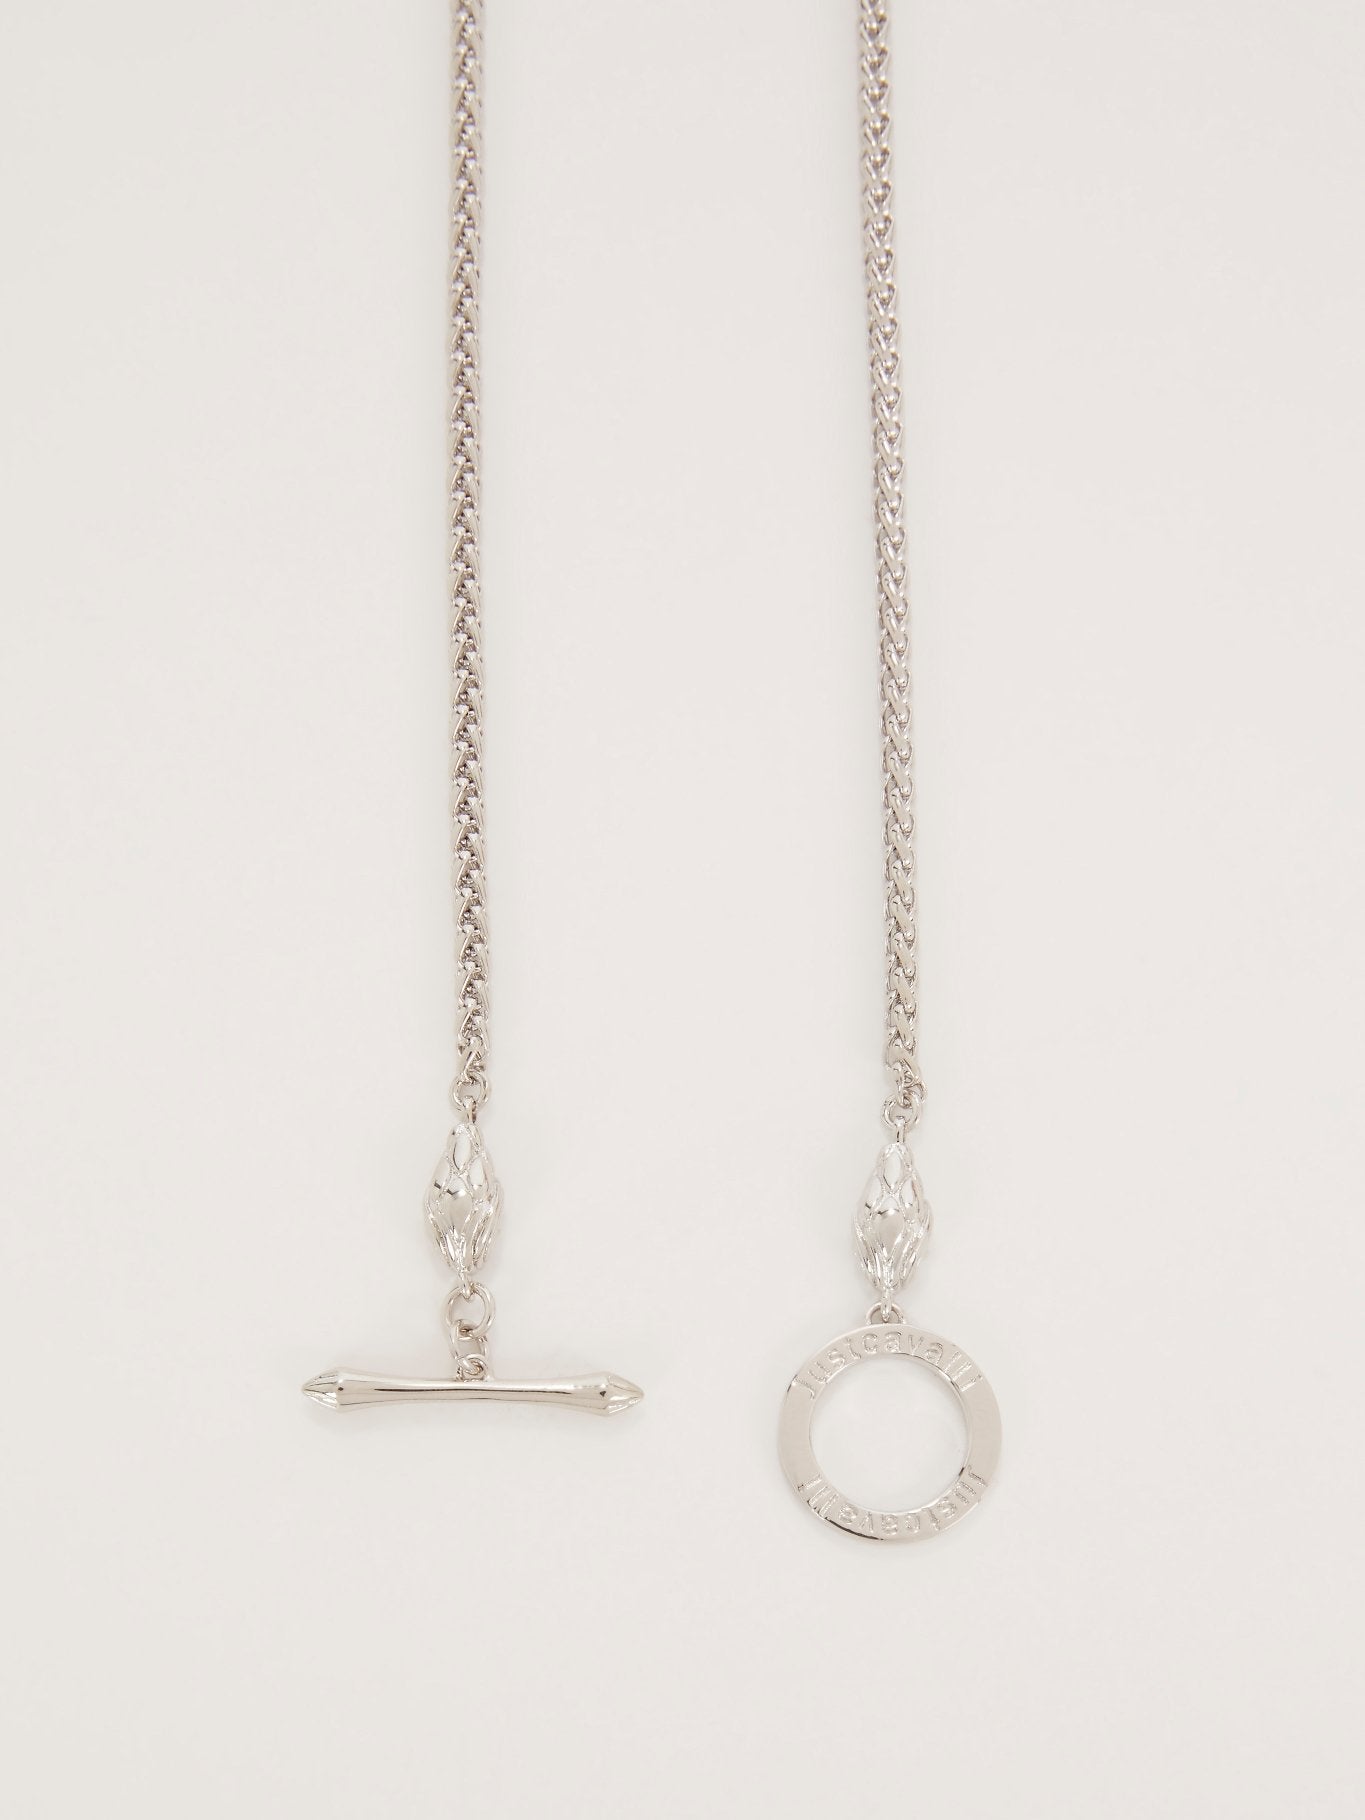 Silver Chain Tassle Toggle Clasp Necklace